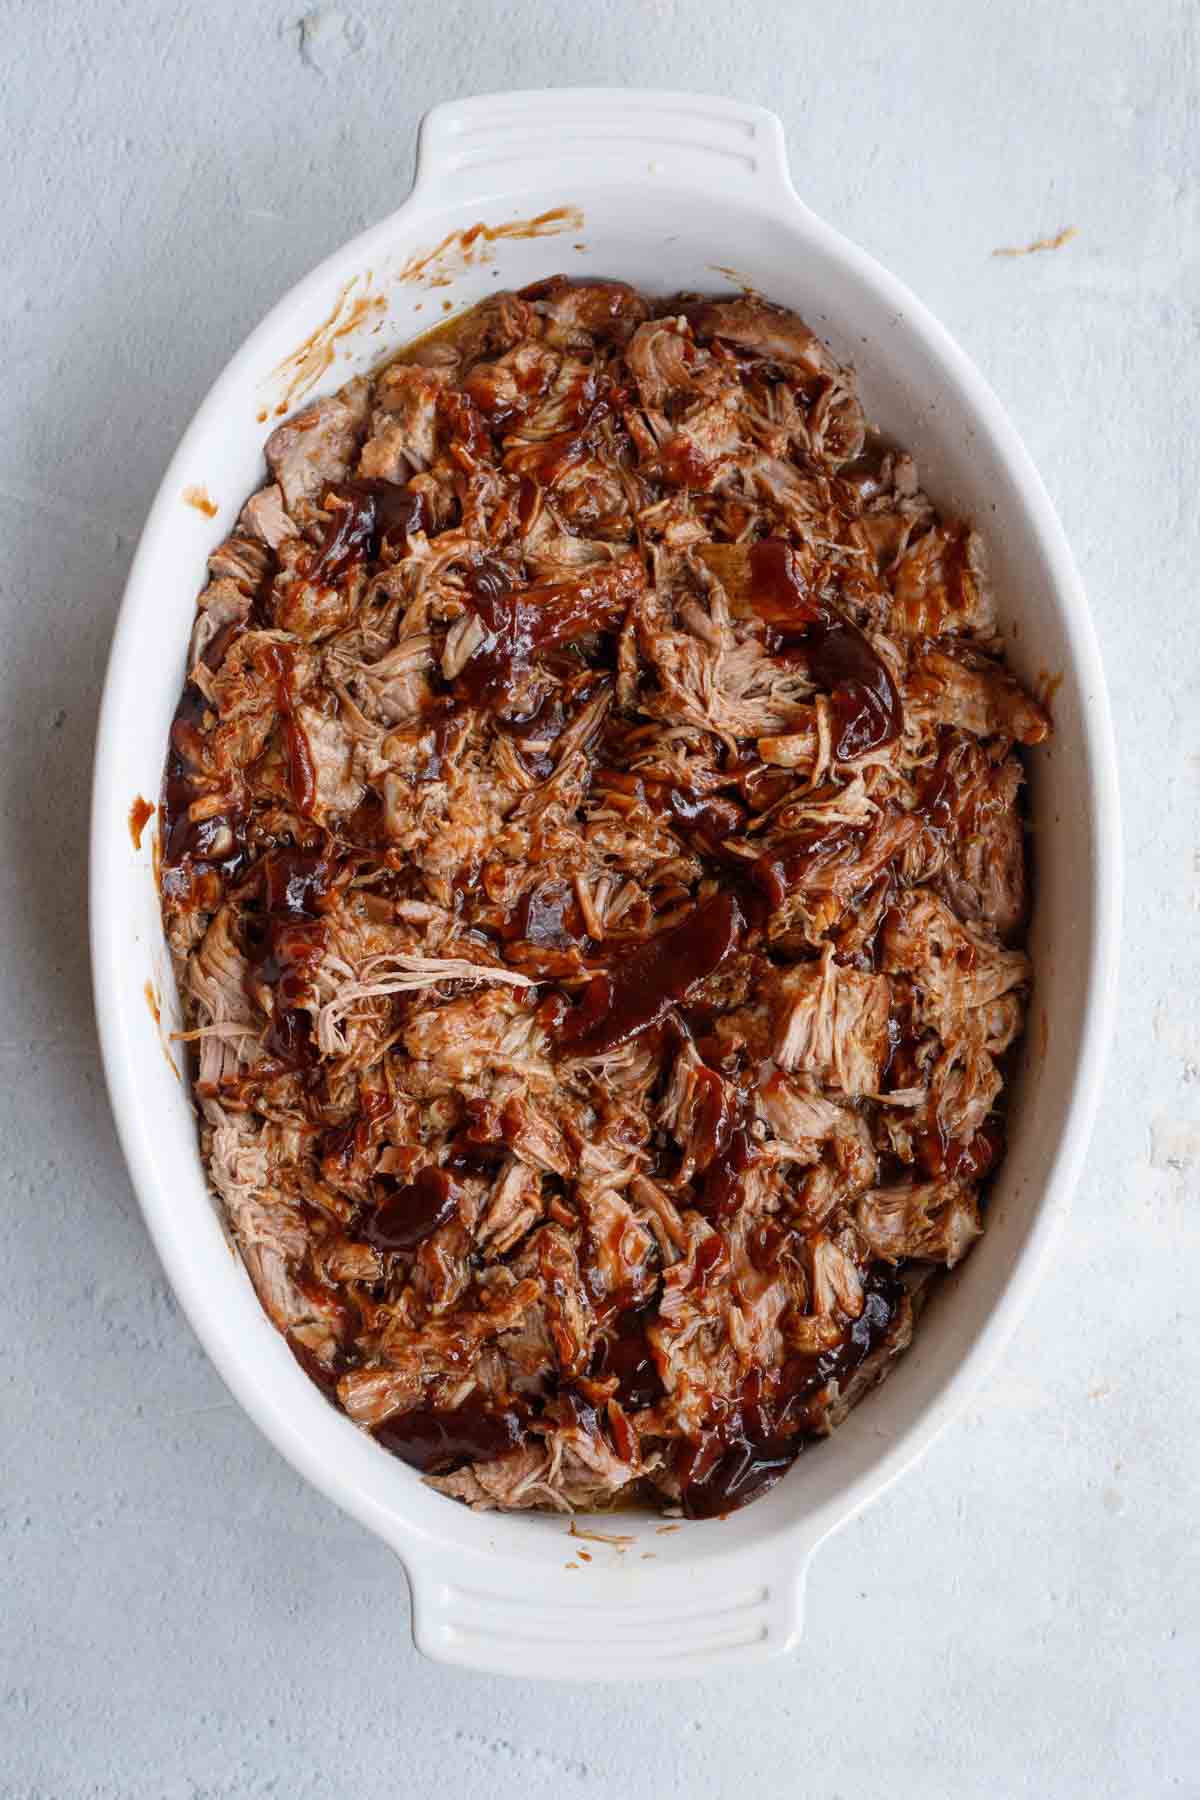 Barbecue sauce is added to the shredded pork. 